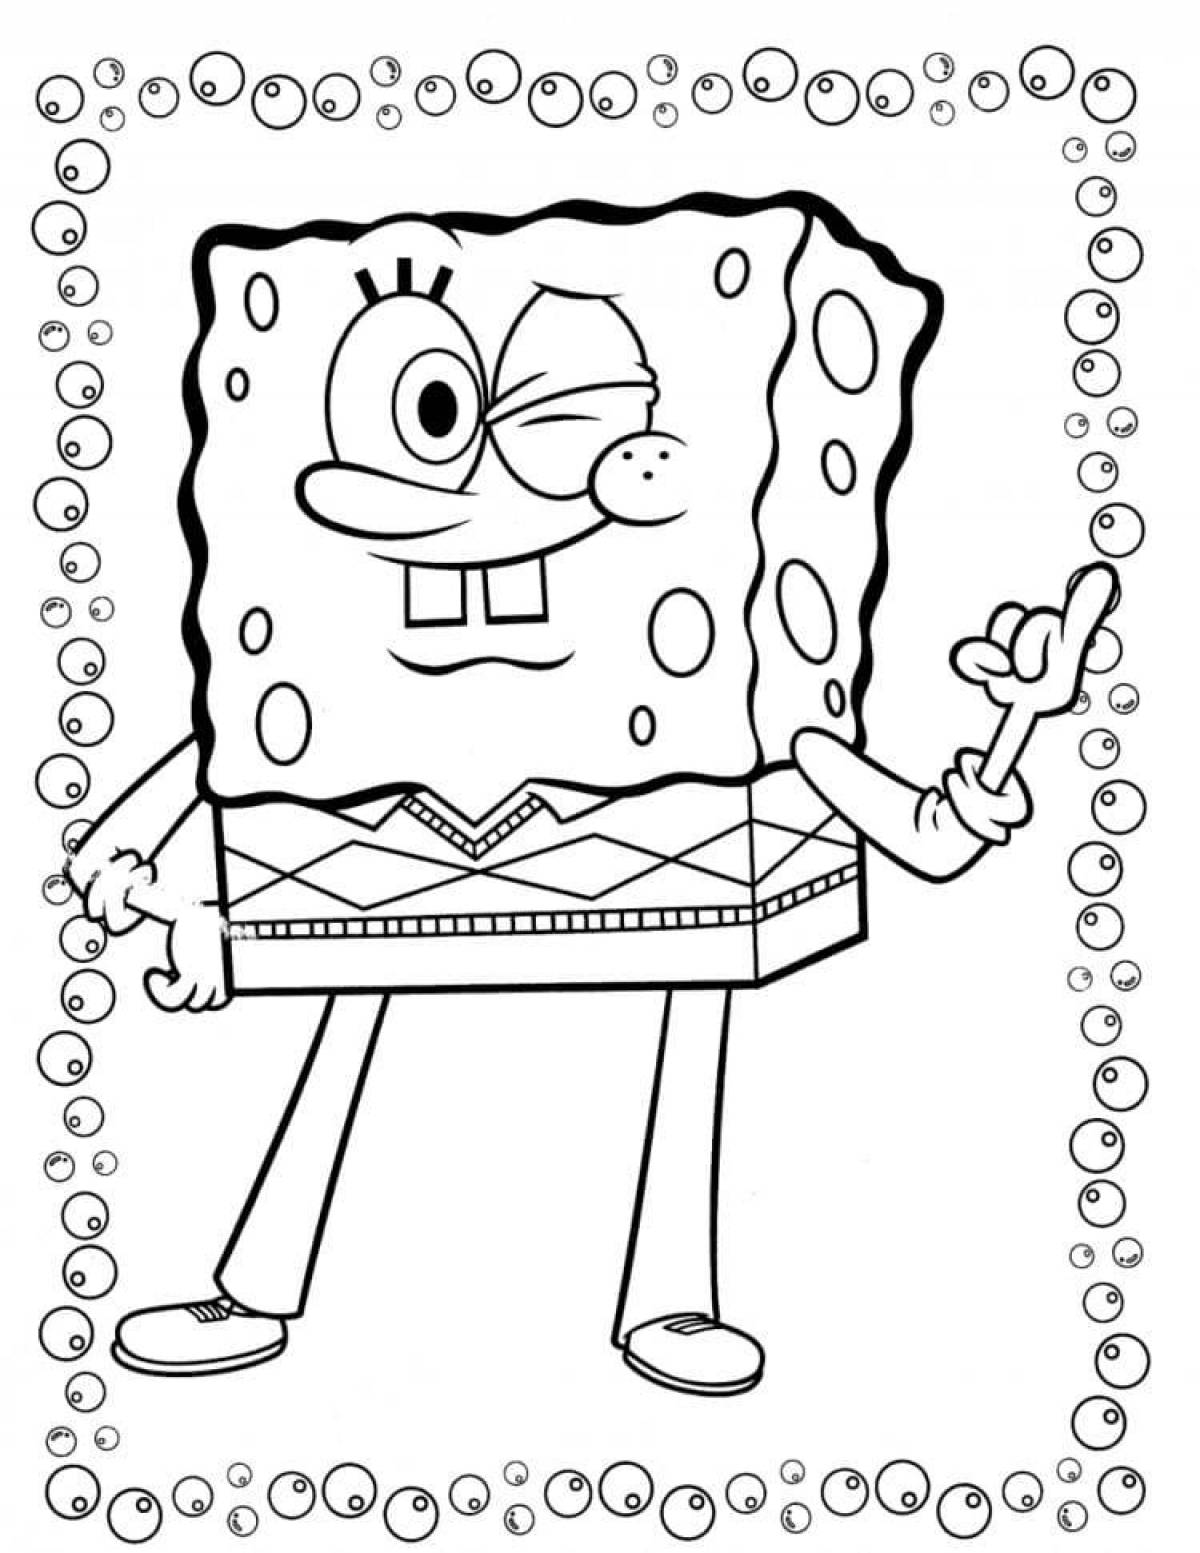 Colorful spongebob coloring page for kids